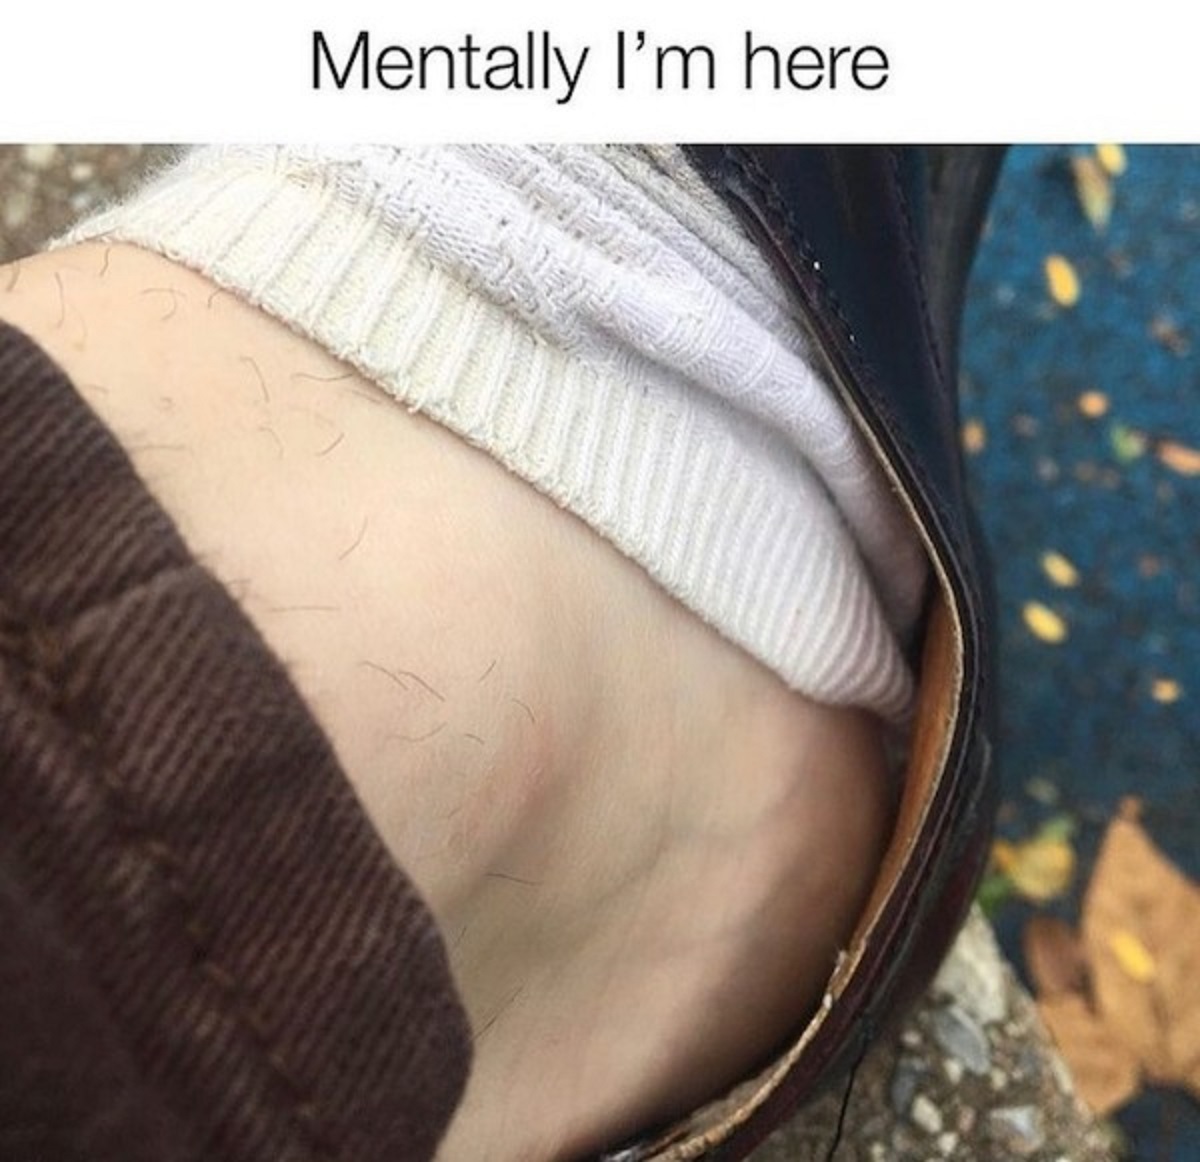 29 Memes For People Who Are a Hot Mess